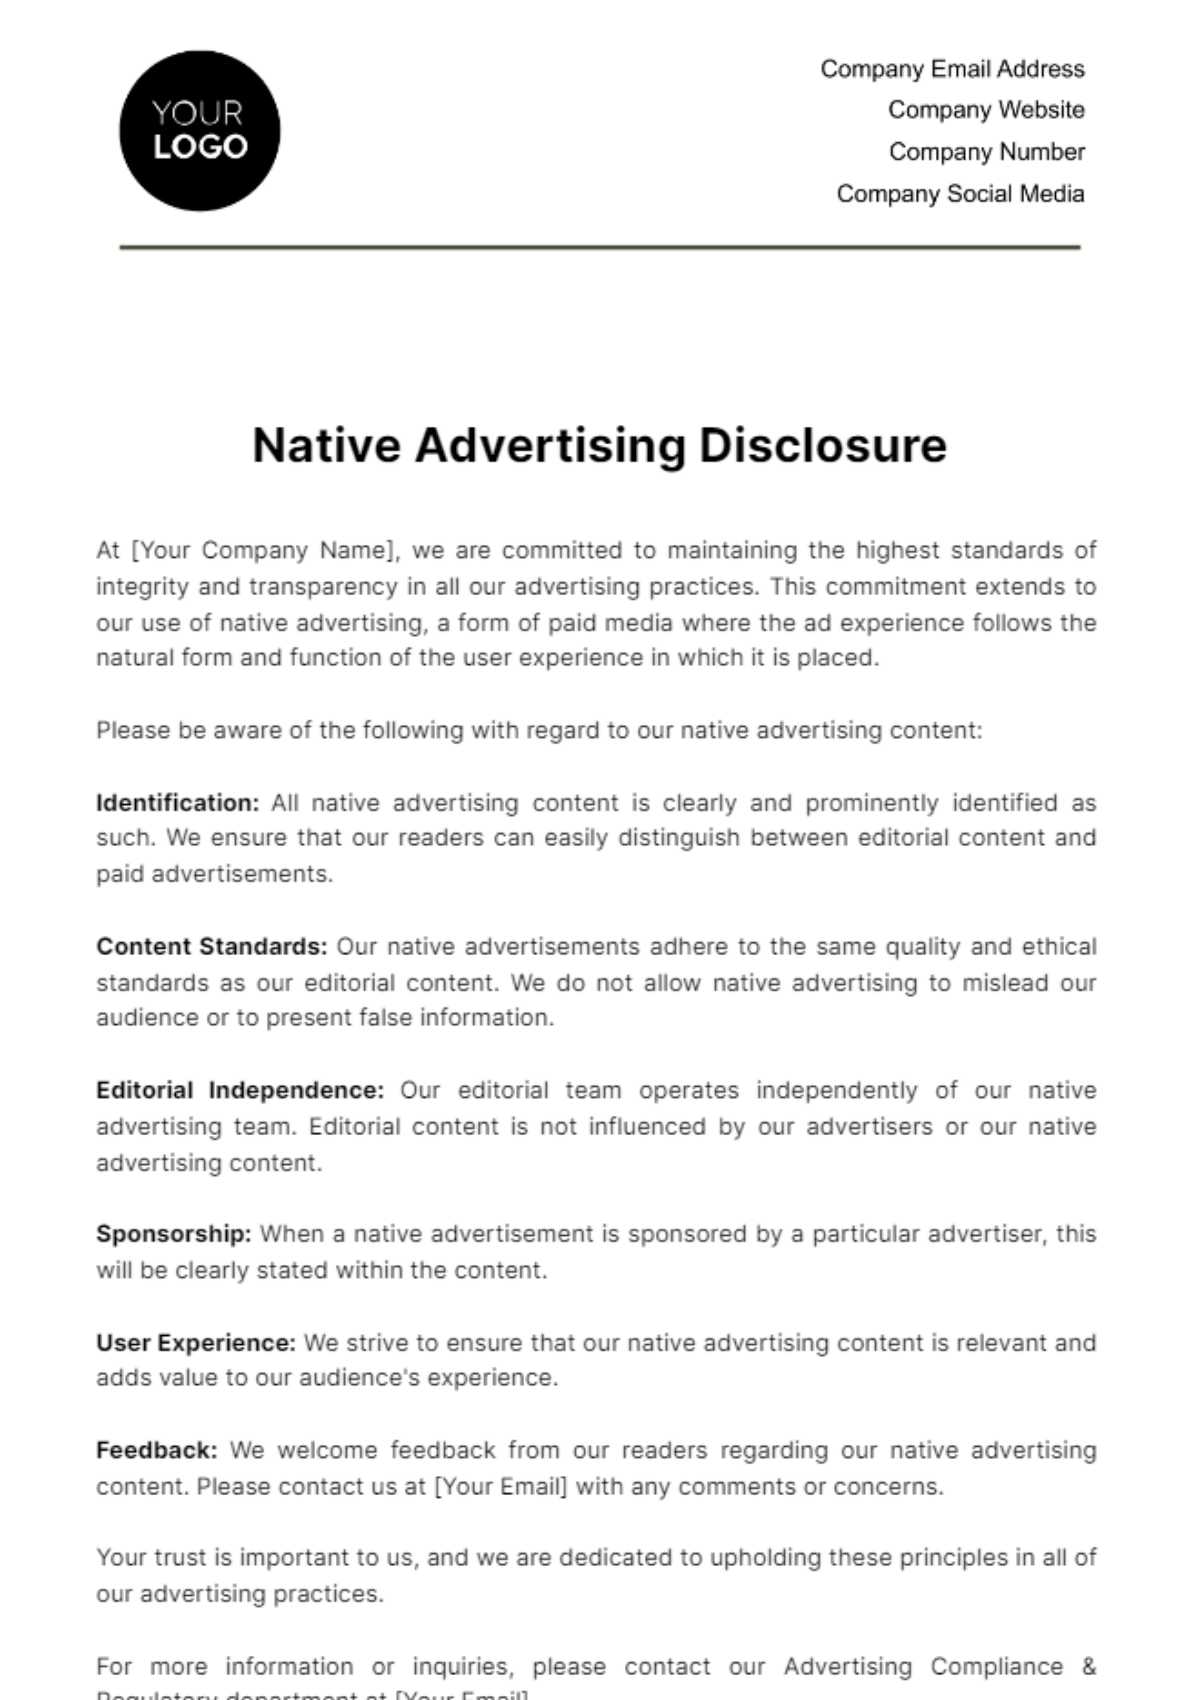 Free Native Advertising Disclosure Template